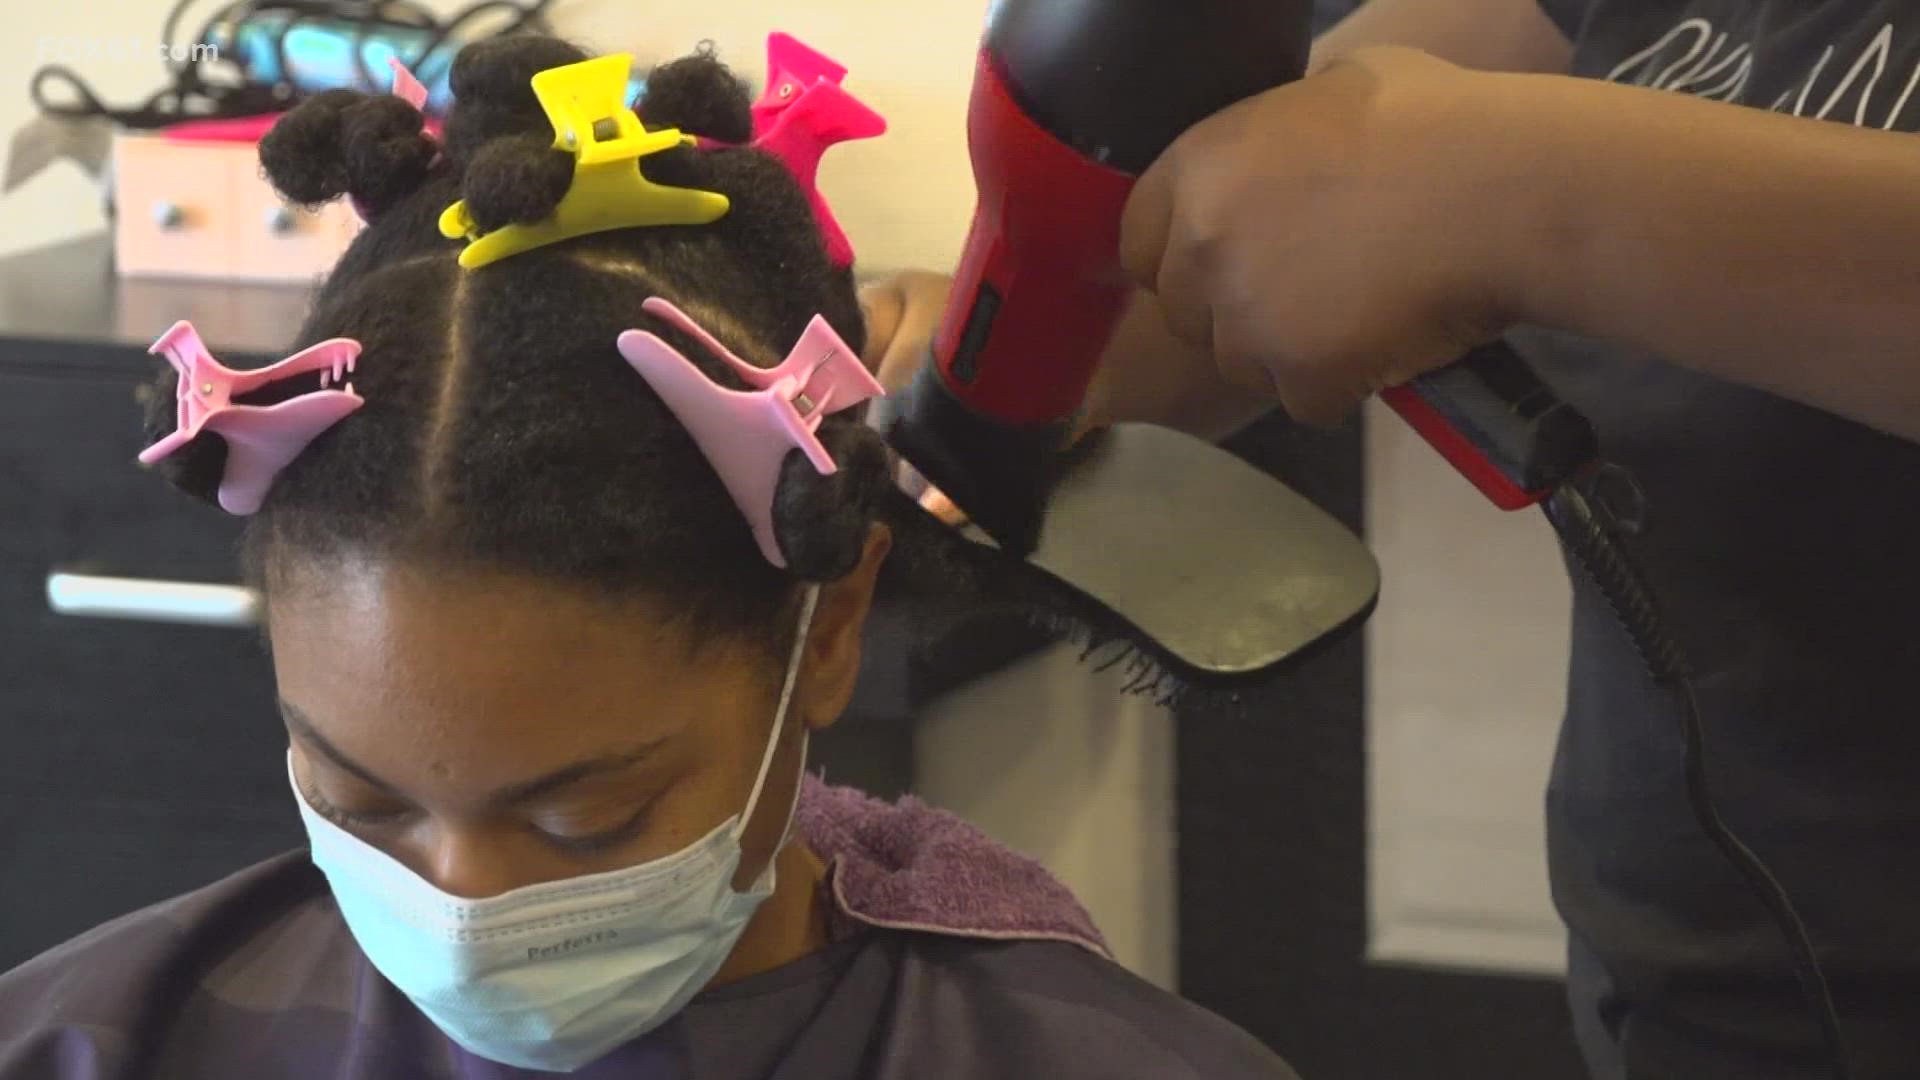 A salon in Bloomfield is working to make people feel beautiful from the inside out by embracing and uniting communities of color.